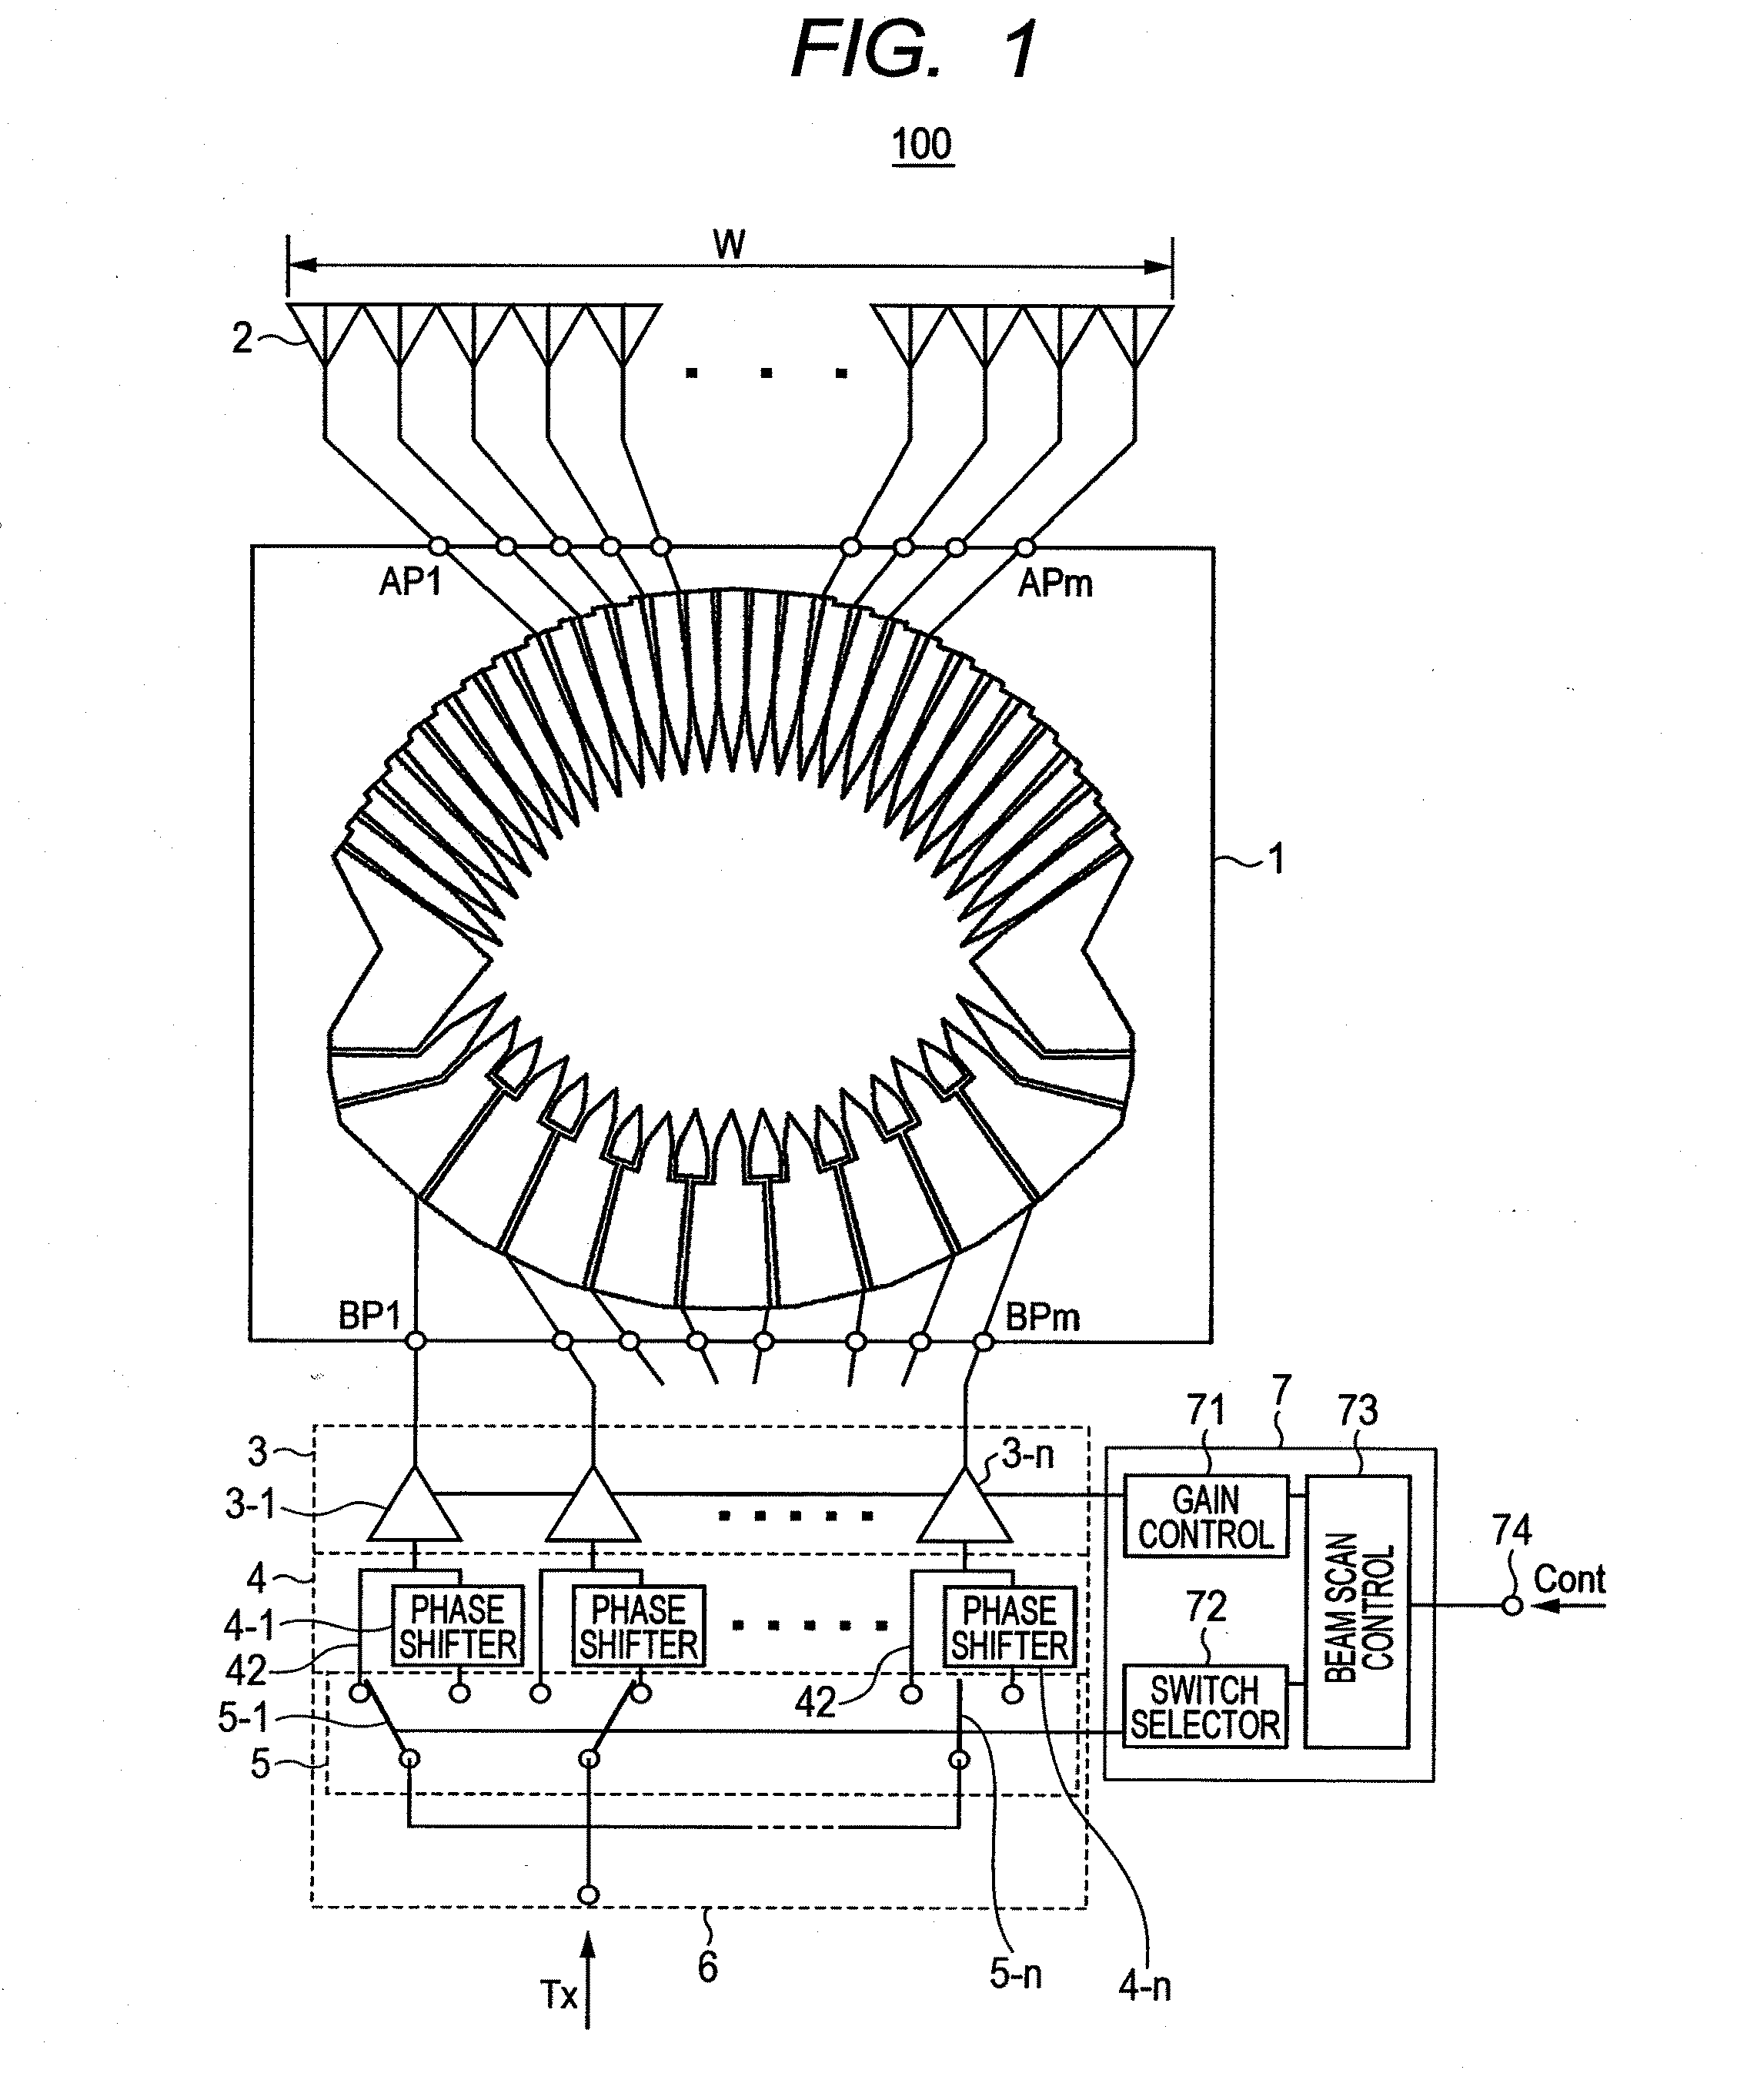 Antenna beam scan unit and wireless communication system using antenna beam scan unit